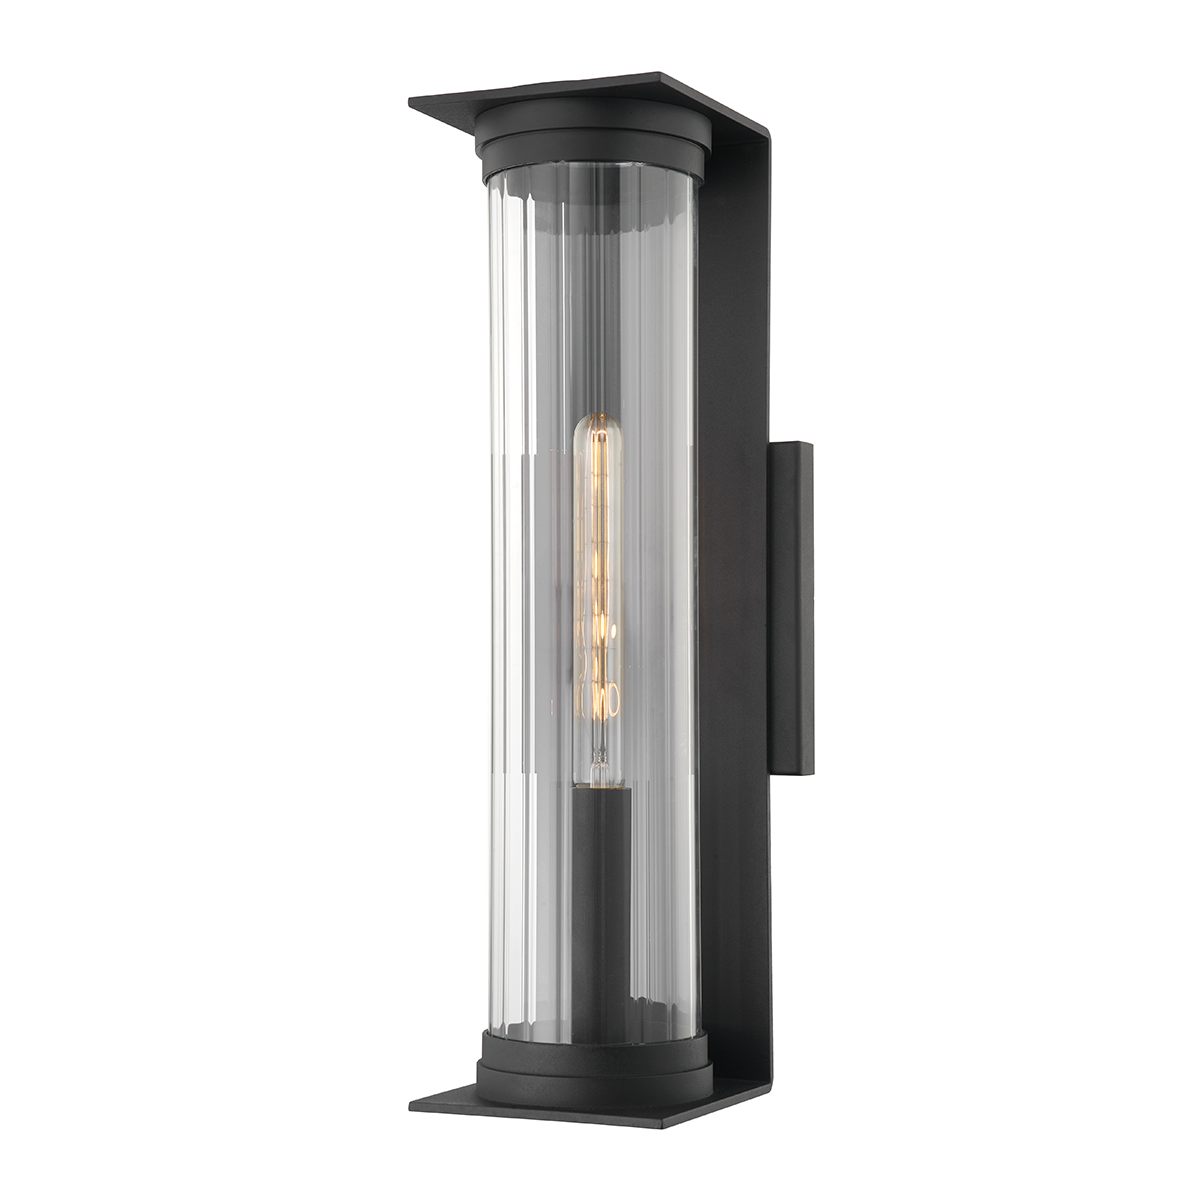 Troy Lighting 1 LIGHT LARGE EXTERIOR WALL SCONCE B1323